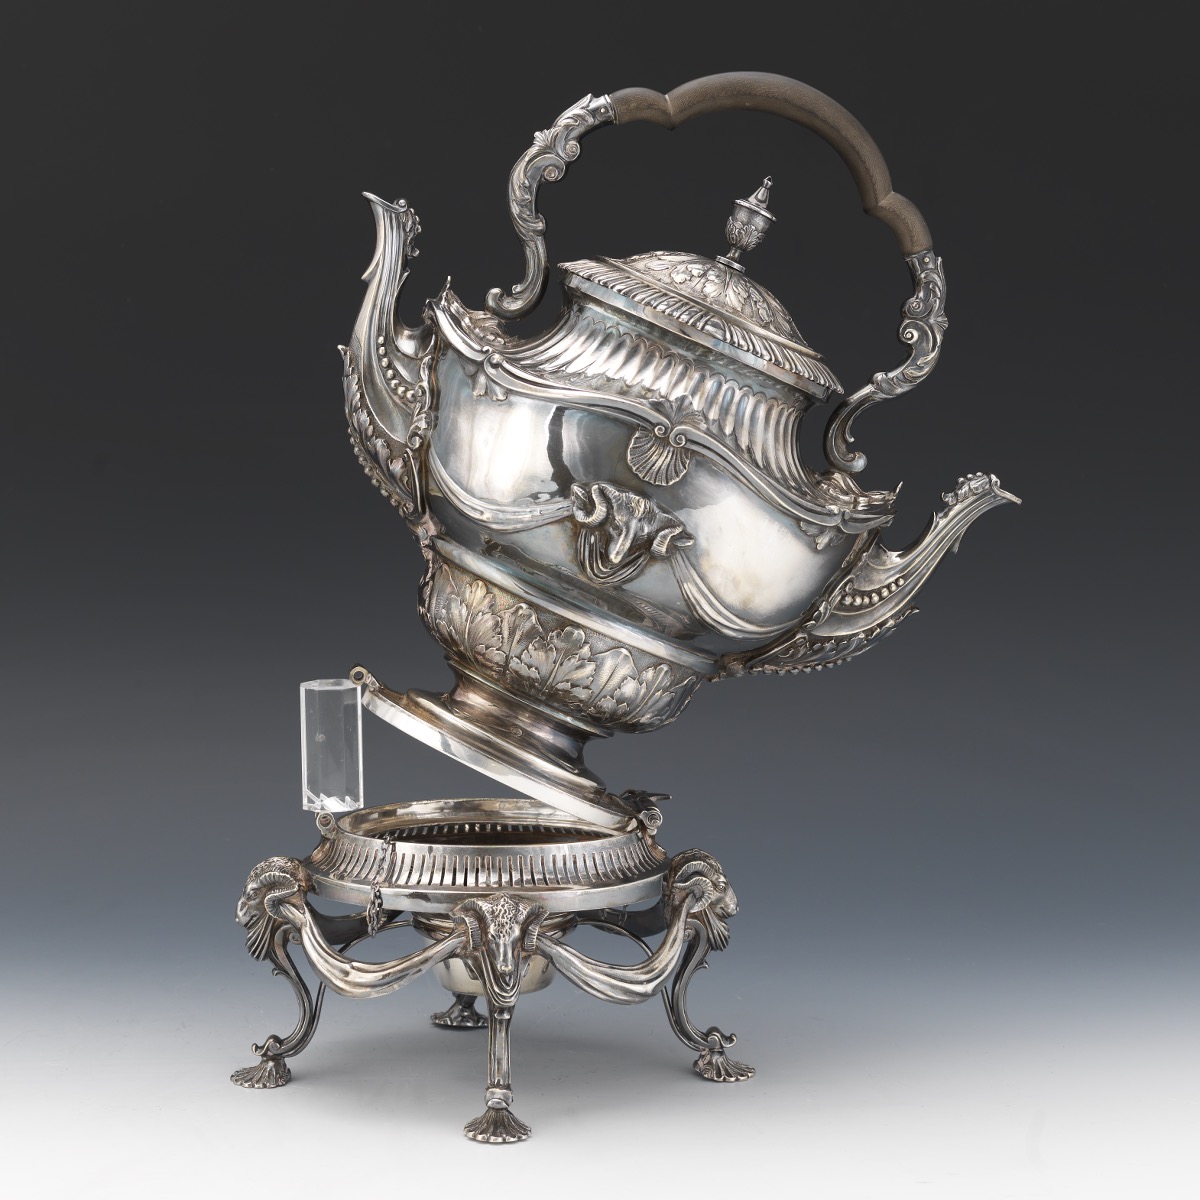 Impressive Sheffield Silver Plated Double Spout Tilted Hot Water Kettle, ca. late 19th Century - Image 6 of 9